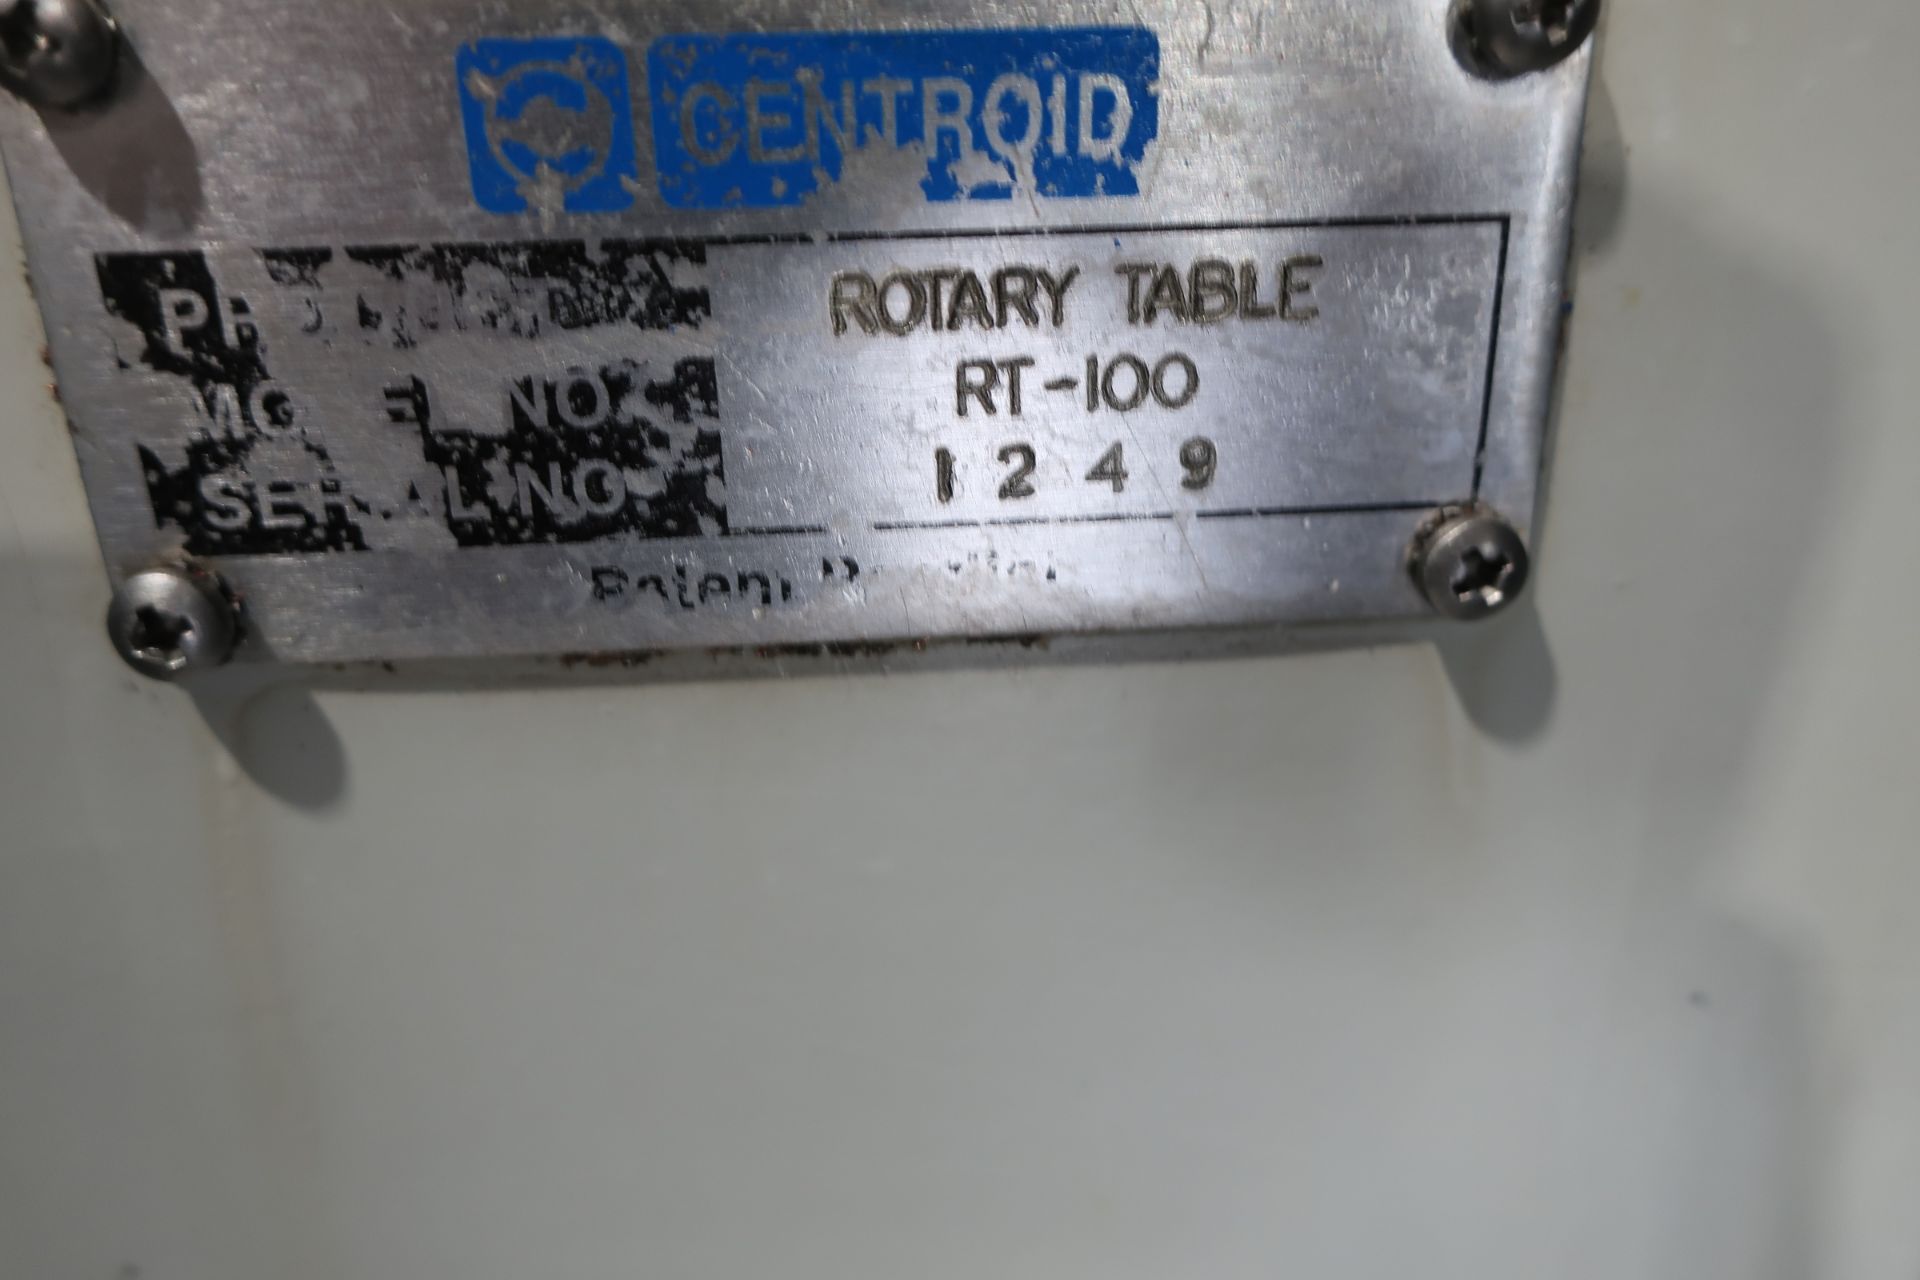 Centroid RT-100 4th Axis Rotary Table with Controller, SN 1249 - Image 3 of 7